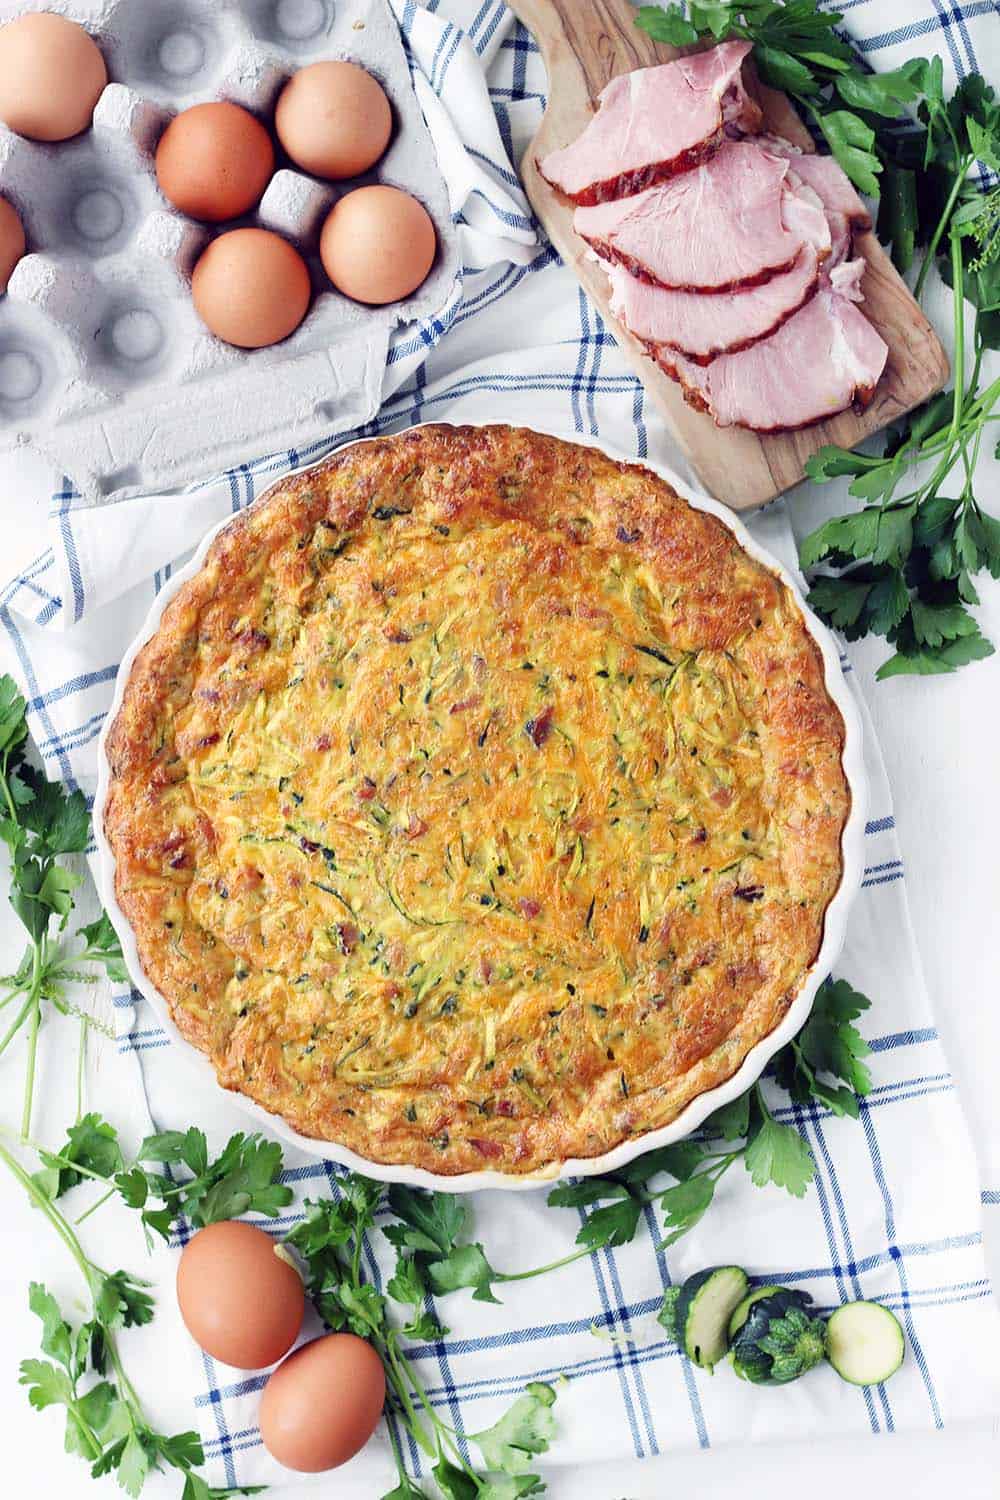 This crustless ham and zucchini quiche recipe is a great way to use up leftover ham  and feed a crowd easily! It can be served at room temperature so you can easily make it ahead of time.